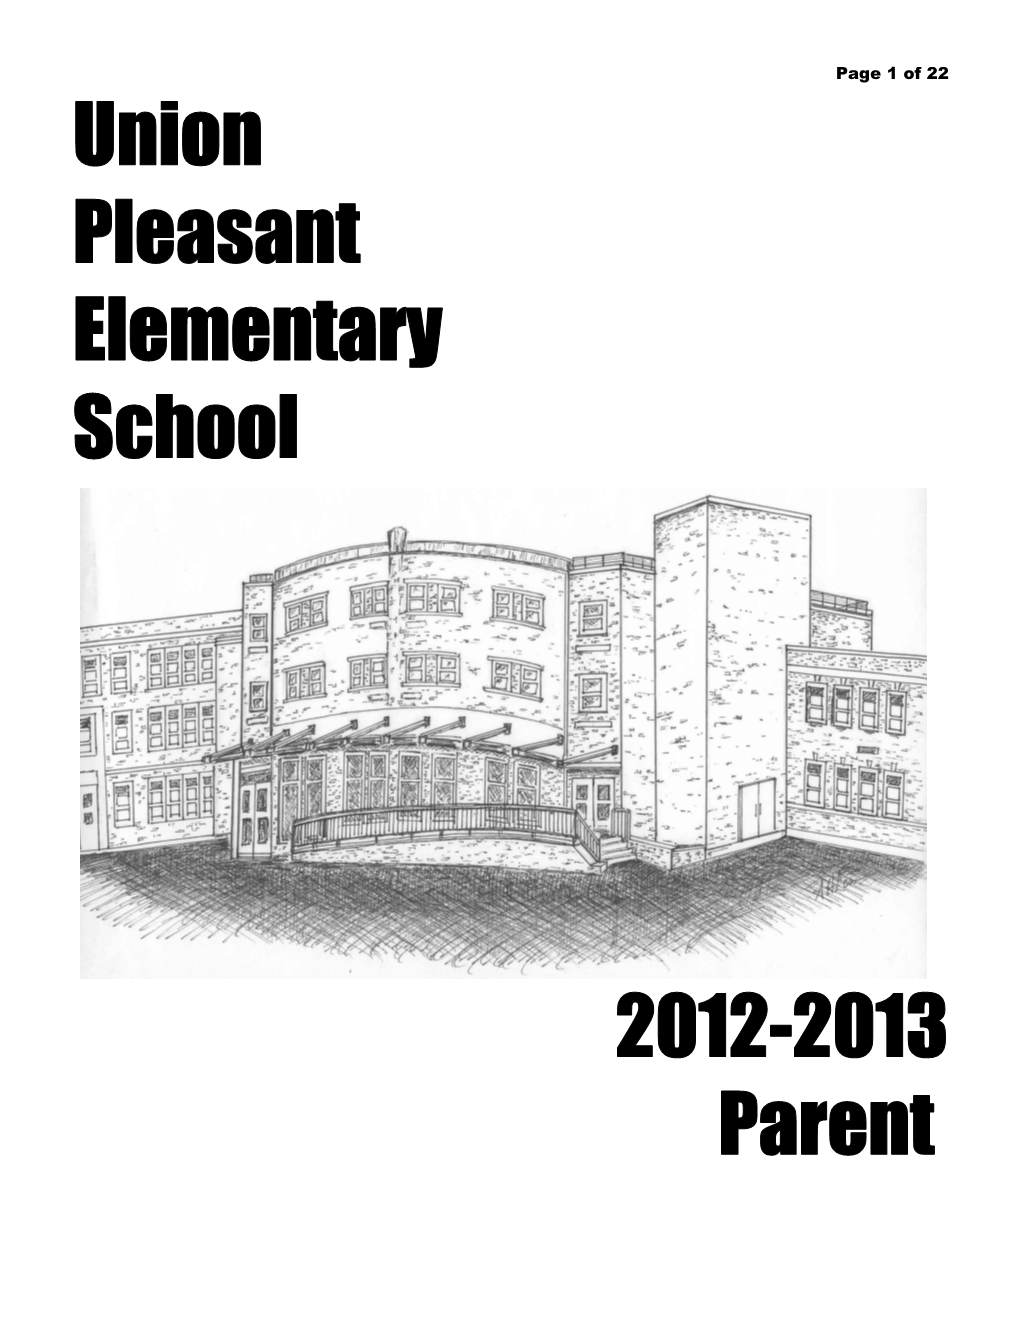 Welcome to Union Pleasant Elementary School!